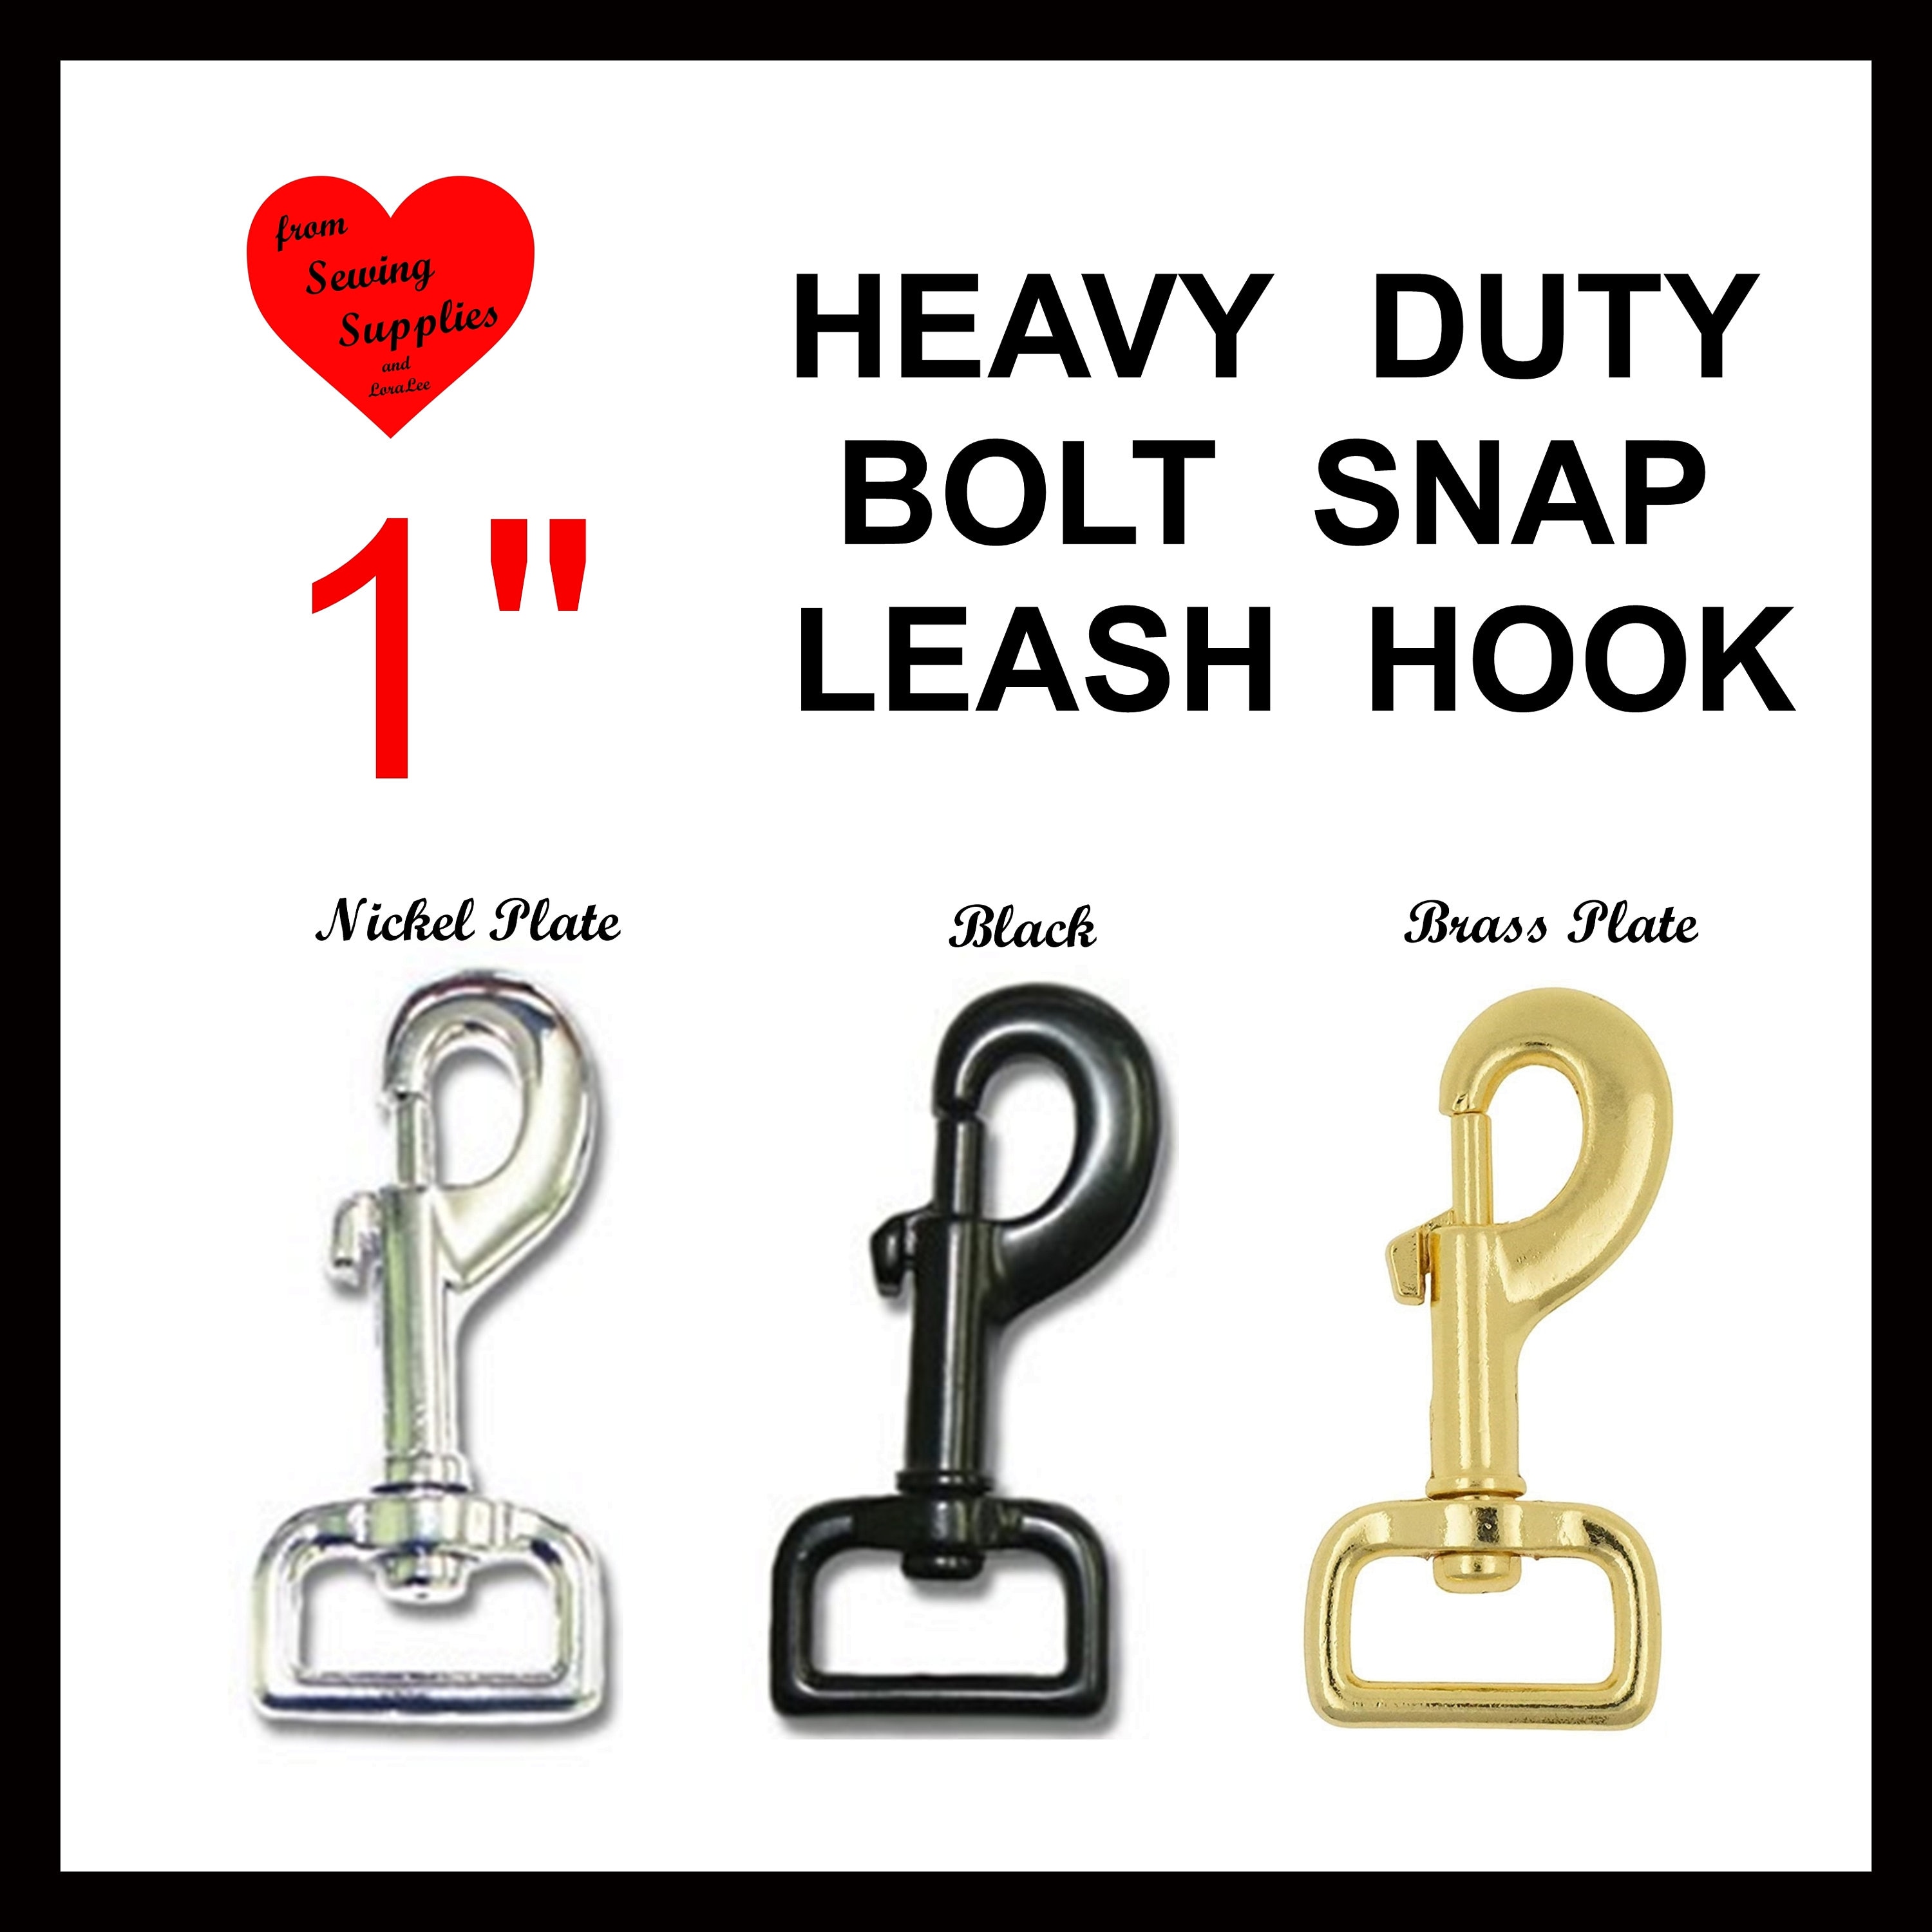 10 PIECES 1 HEAVY DUTY Leash Hook, Casted Swivel Snap Lobster Claw